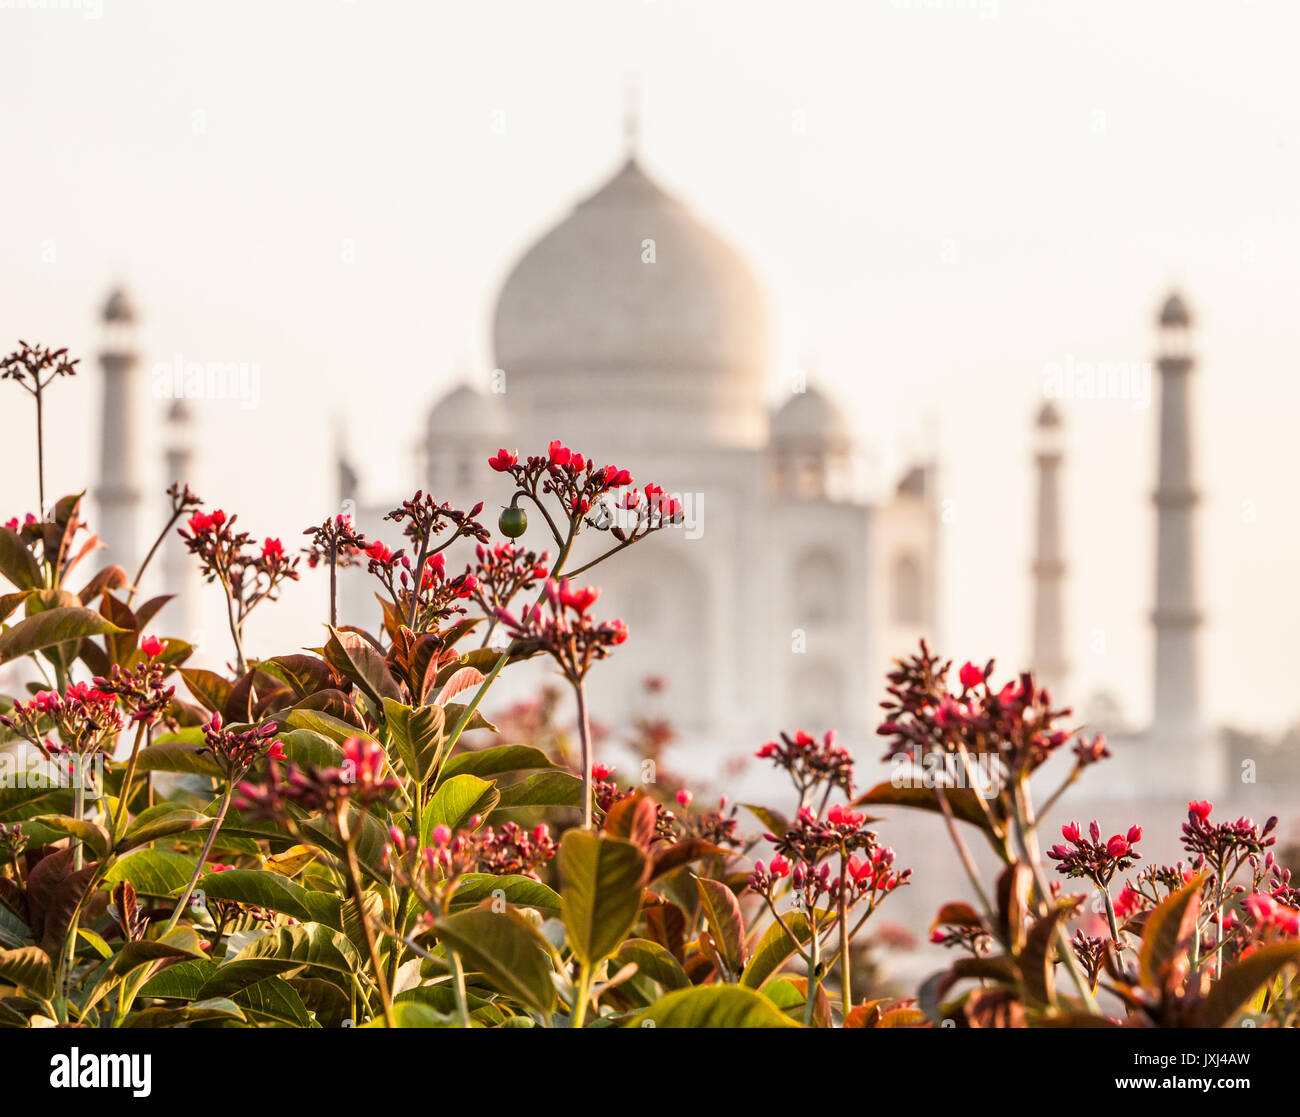 The Taj Mahal seen from the North across the Yamuna River in the afternoon, Agra, India. Stock Photo